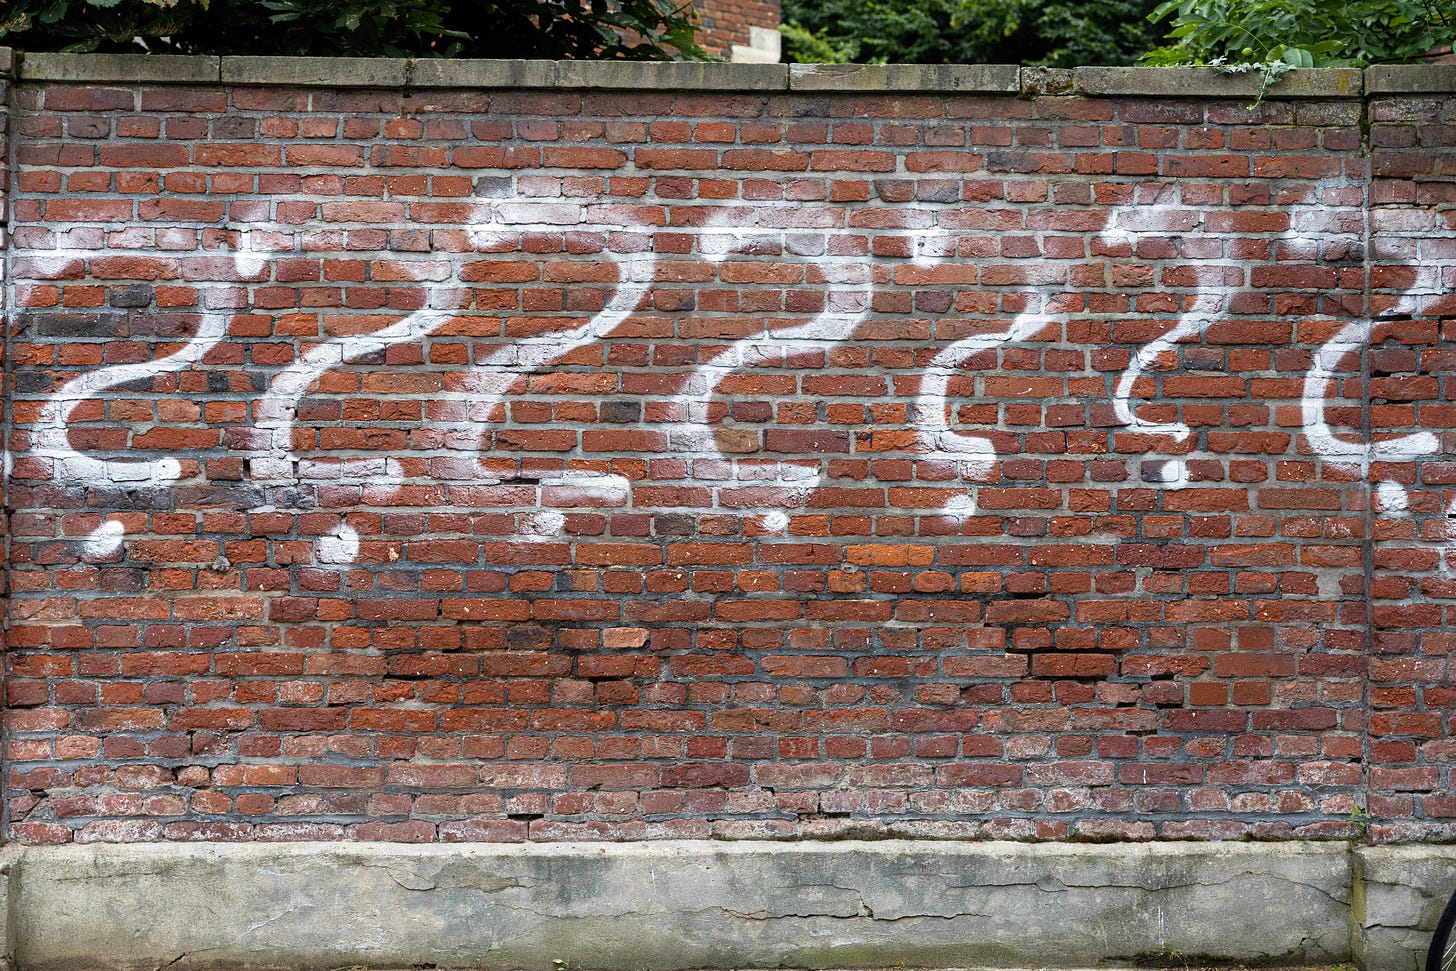 Brick wall with white spraypainted question marks in a very serpentine style. I like my question marks pointier at the bottom. Is it weird to have punctuation preferences?